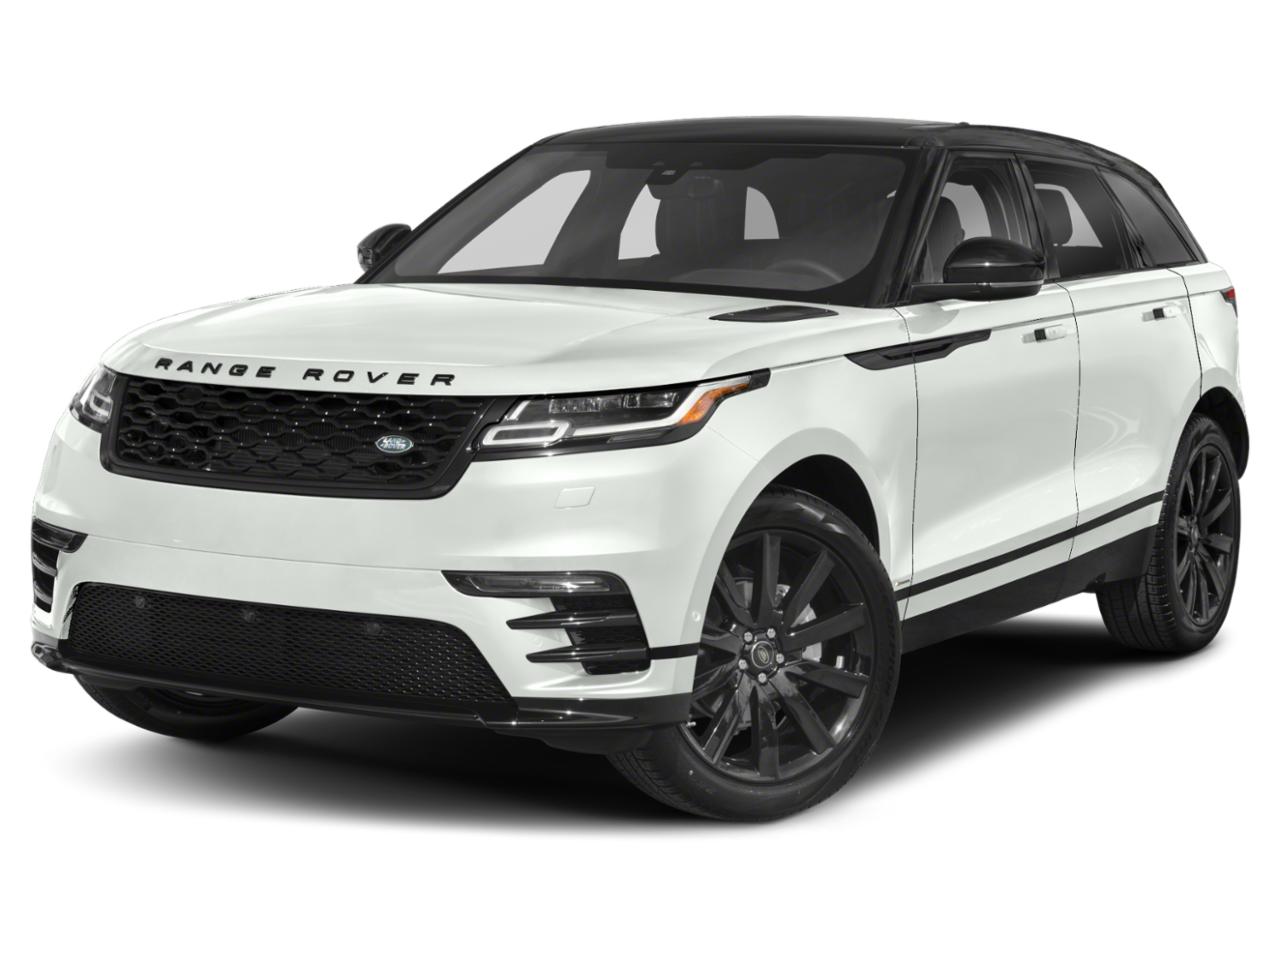 2018 Land Rover Range Rover Velar Vehicle Photo in Weatherford, TX 76087